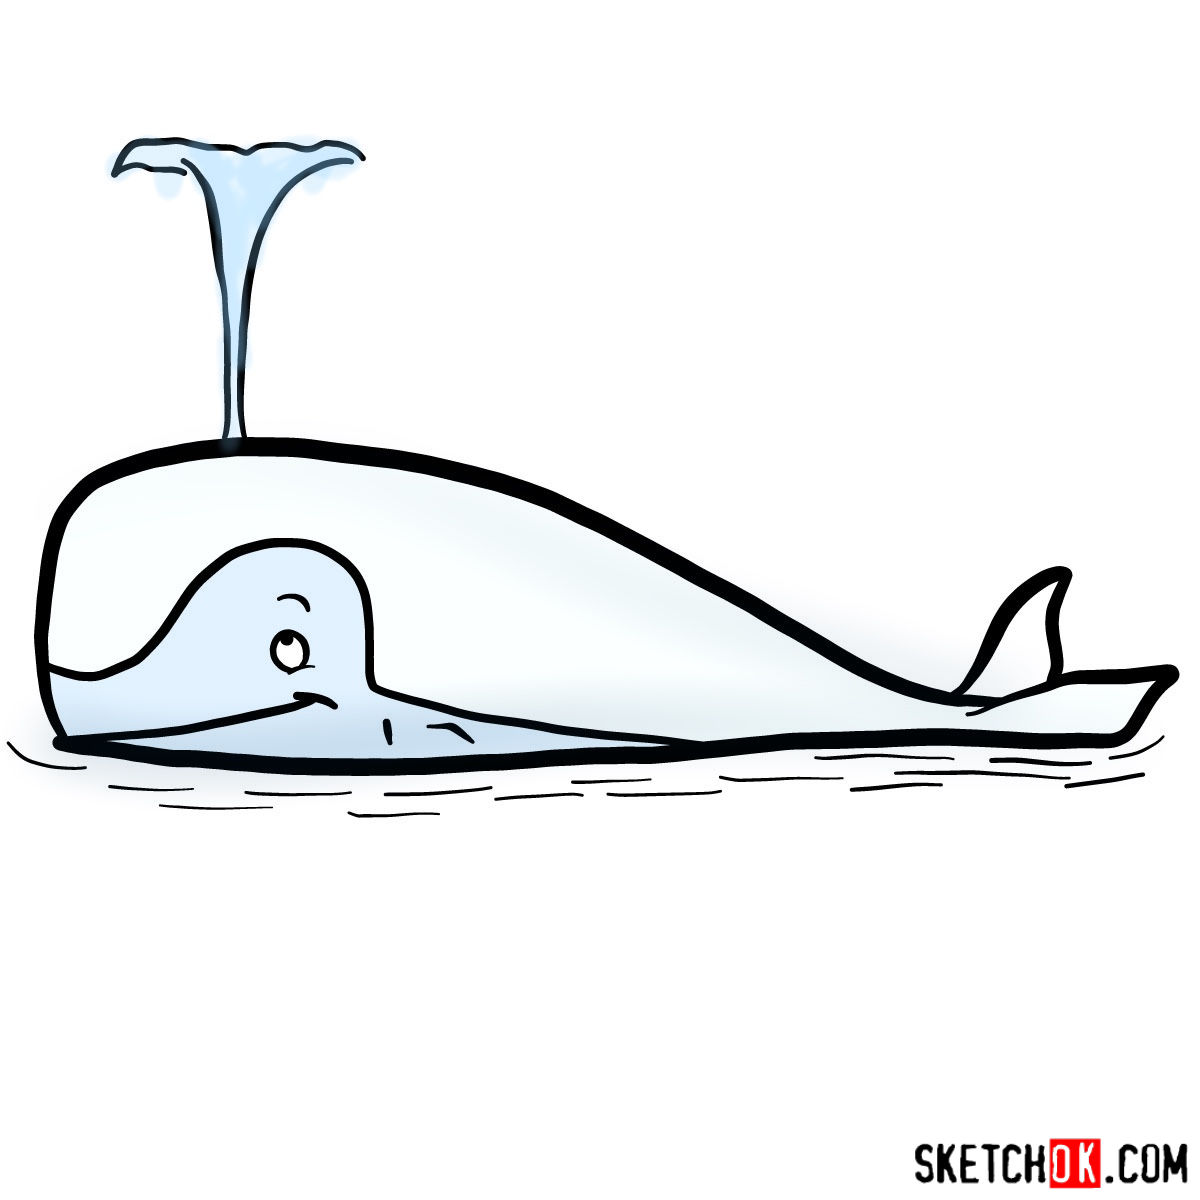 How to draw Moby Dick